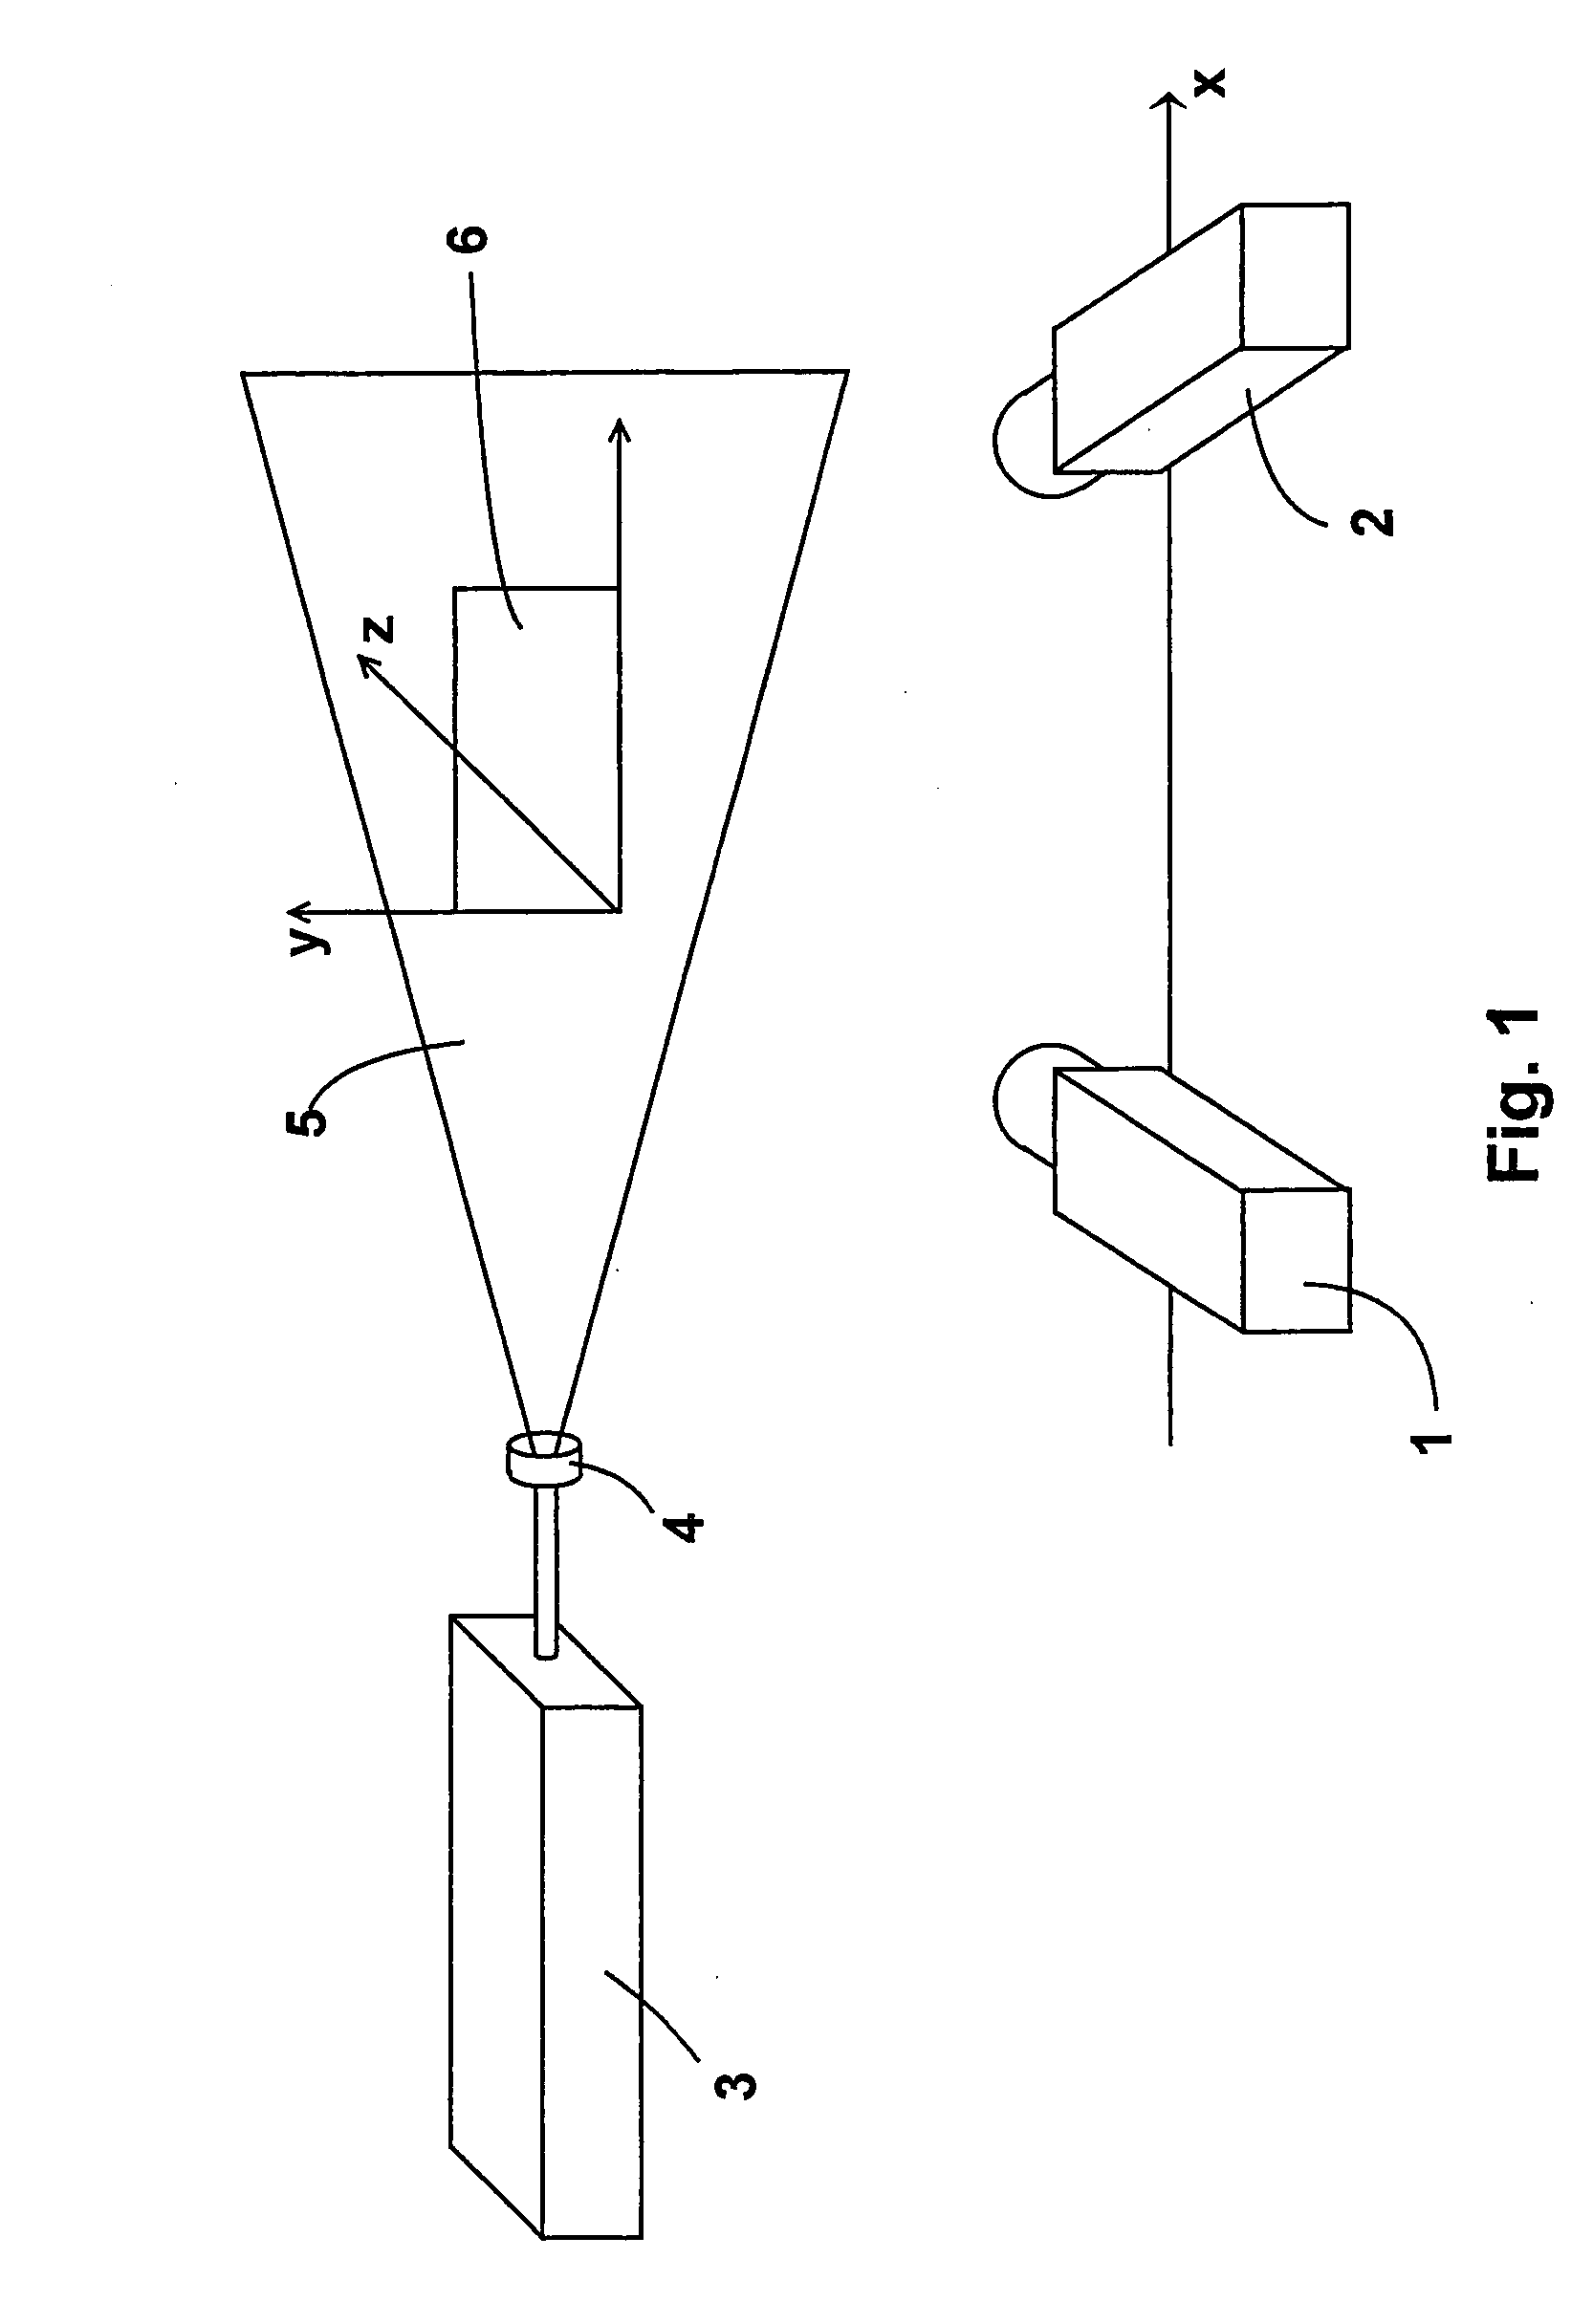 Method of determining the imaging equation for self calibration with regard to performing stereo-PIV methods